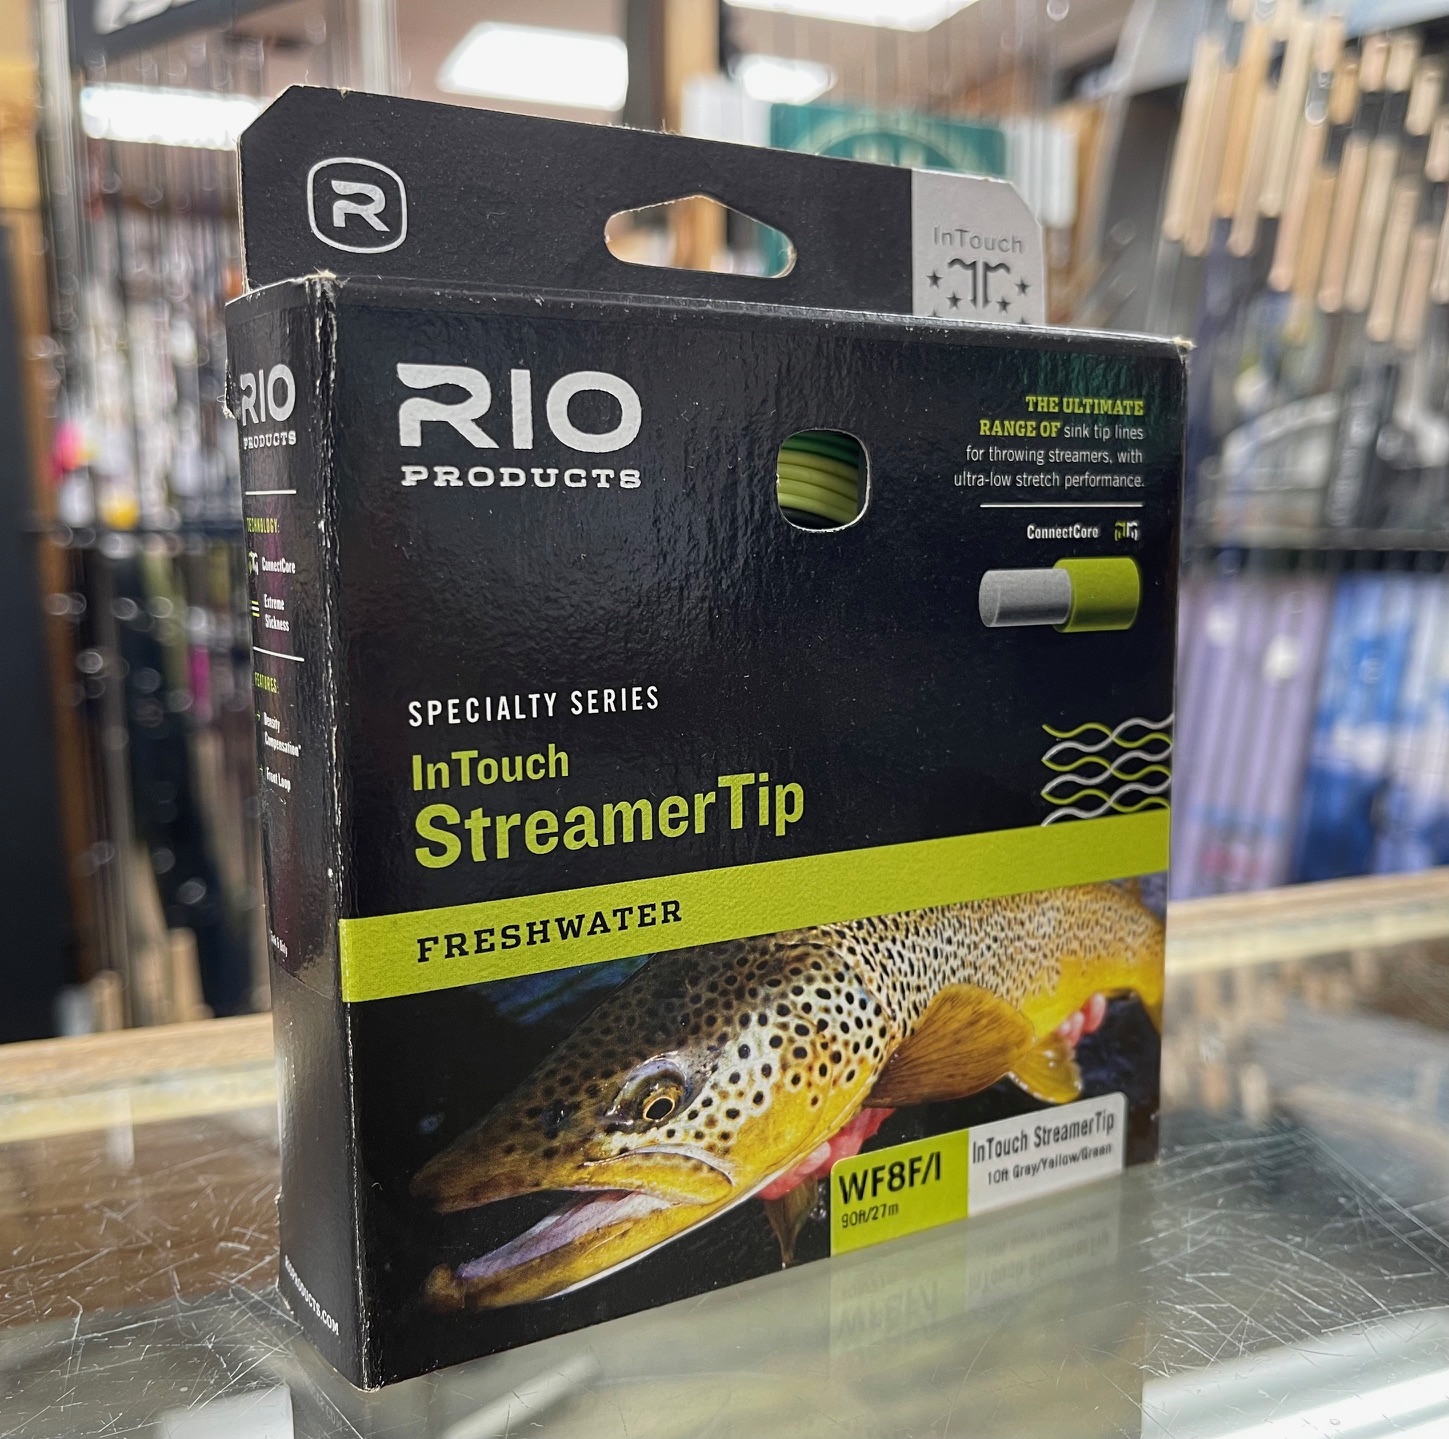 Rio Products InTouch StreamerTip